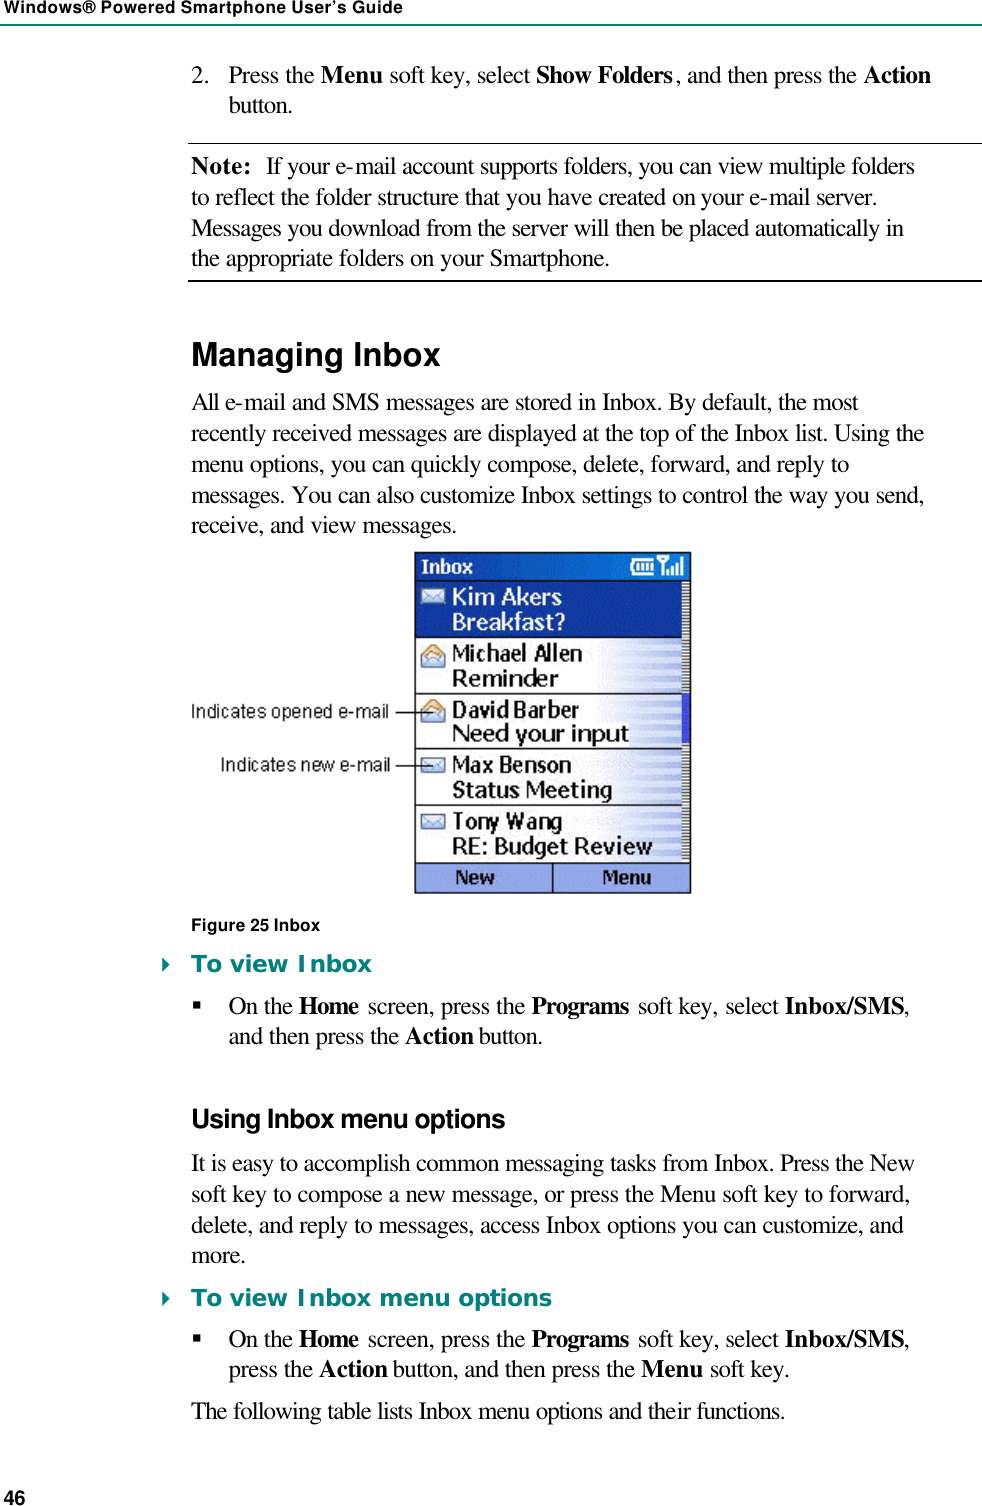 Windows® Powered Smartphone User’s Guide 46 2.  Press the Menu soft key, select Show Folders, and then press the Action button. Note: If your e-mail account supports folders, you can view multiple folders to reflect the folder structure that you have created on your e-mail server. Messages you download from the server will then be placed automatically in the appropriate folders on your Smartphone. Managing Inbox All e-mail and SMS messages are stored in Inbox. By default, the most recently received messages are displayed at the top of the Inbox list. Using the menu options, you can quickly compose, delete, forward, and reply to messages. You can also customize Inbox settings to control the way you send, receive, and view messages.  Figure 25 Inbox 4 To view Inbox § On the Home screen, press the Programs soft key, select Inbox/SMS, and then press the Action button. Using Inbox menu options It is easy to accomplish common messaging tasks from Inbox. Press the New soft key to compose a new message, or press the Menu soft key to forward, delete, and reply to messages, access Inbox options you can customize, and more. 4 To view Inbox menu options § On the Home screen, press the Programs soft key, select Inbox/SMS, press the Action button, and then press the Menu soft key. The following table lists Inbox menu options and their functions. 